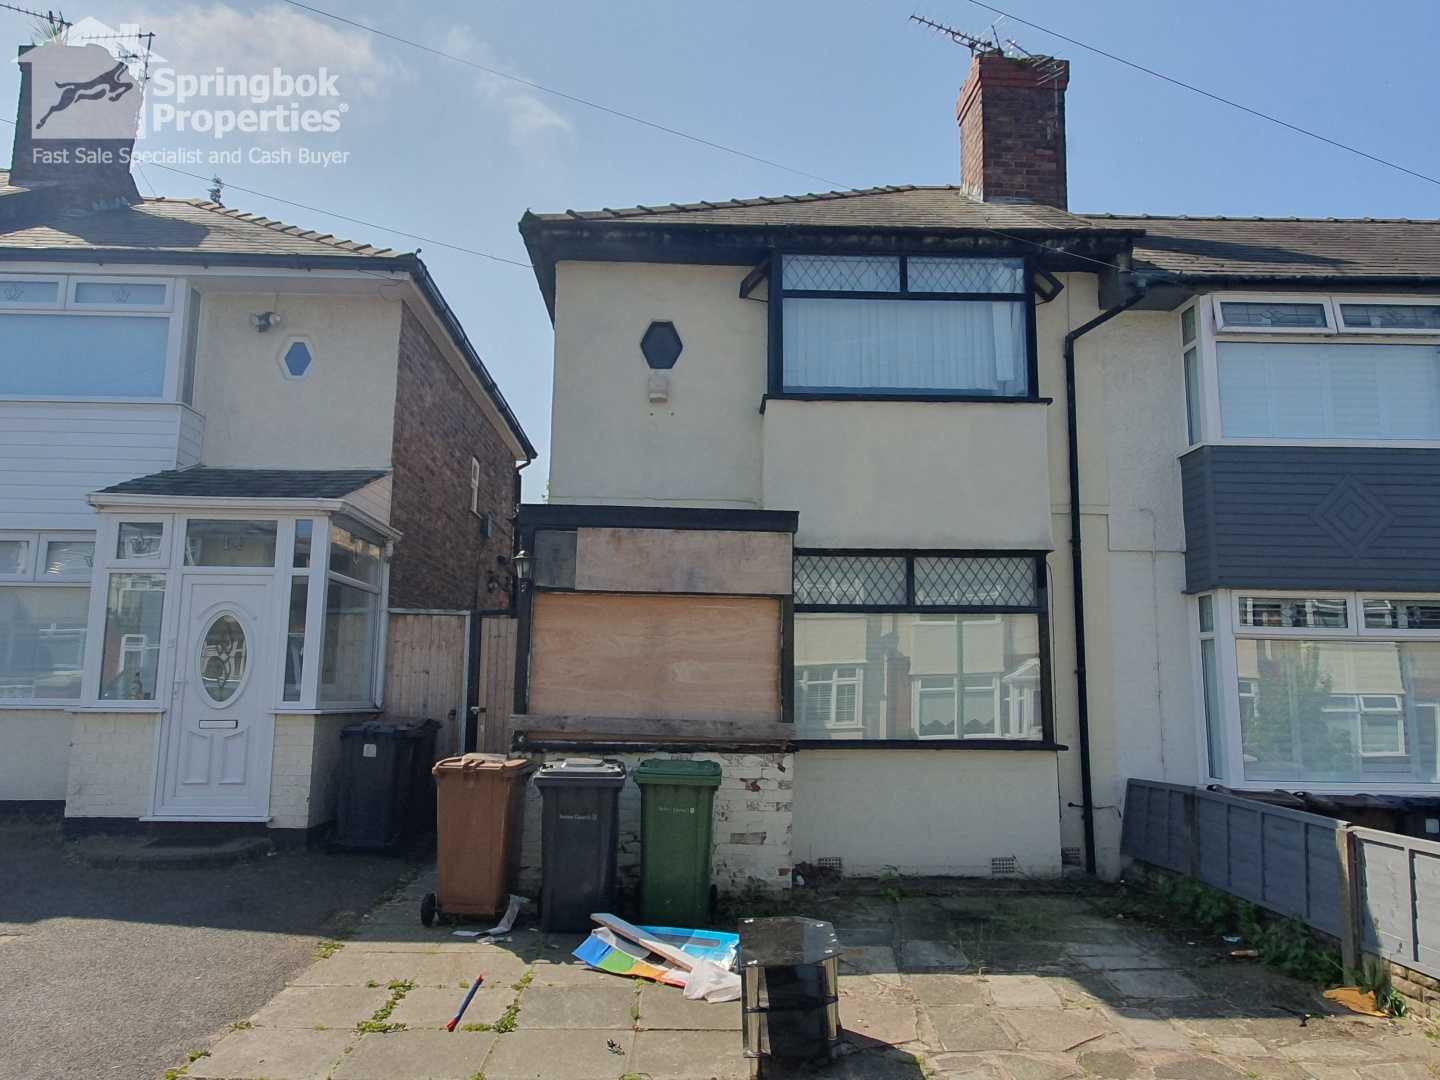 House in Litherland, Sefton 11816749